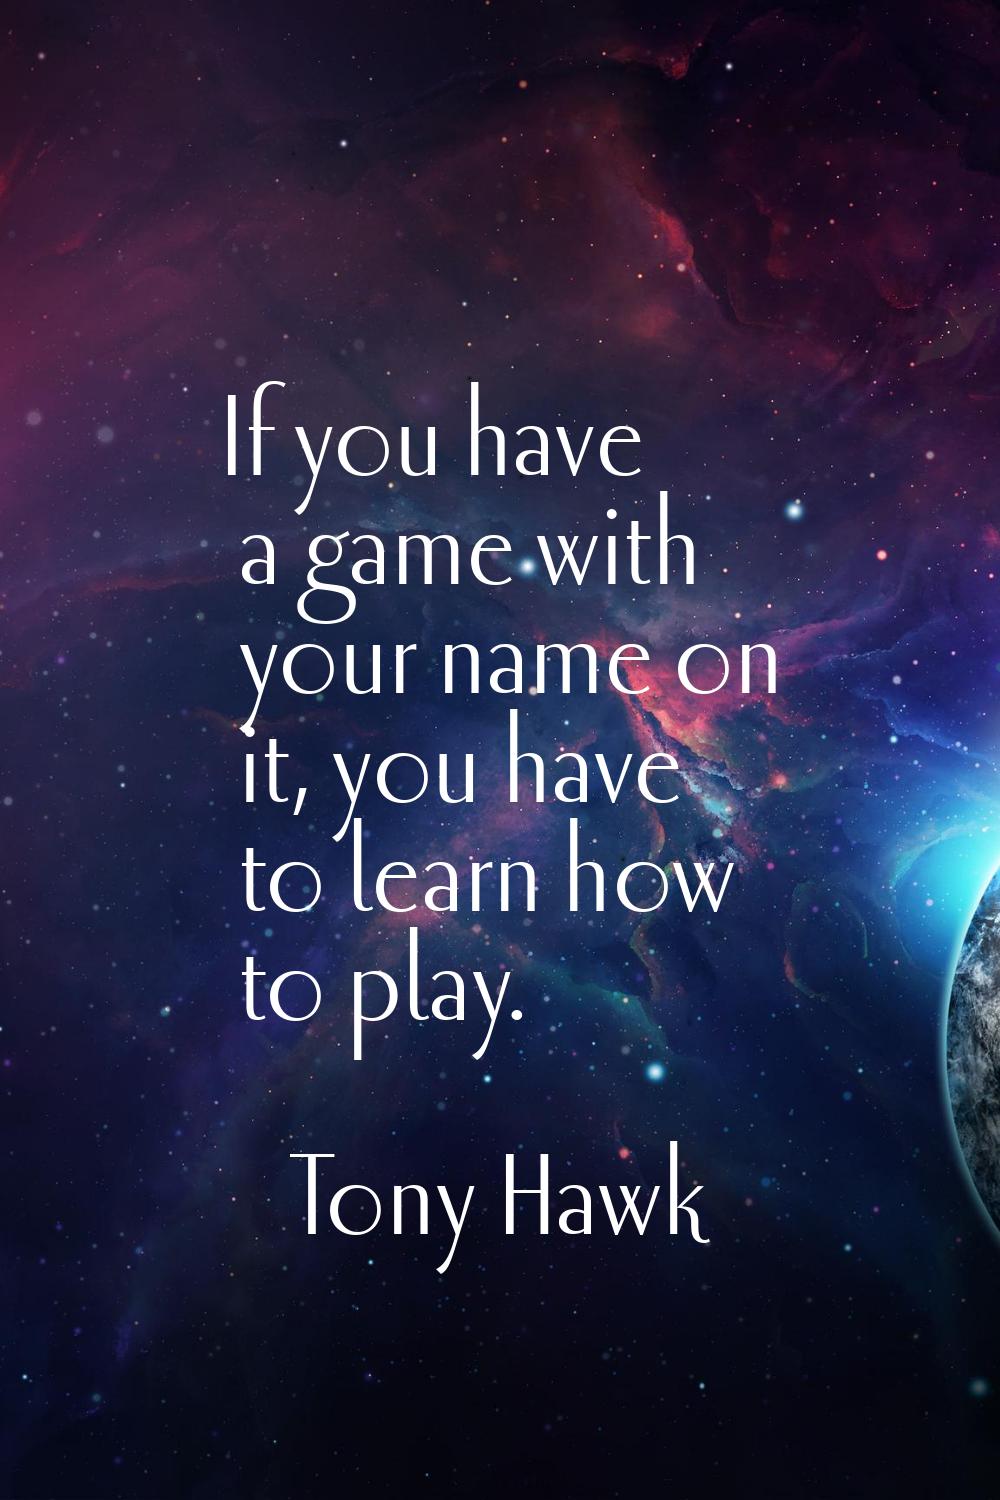 If you have a game with your name on it, you have to learn how to play.